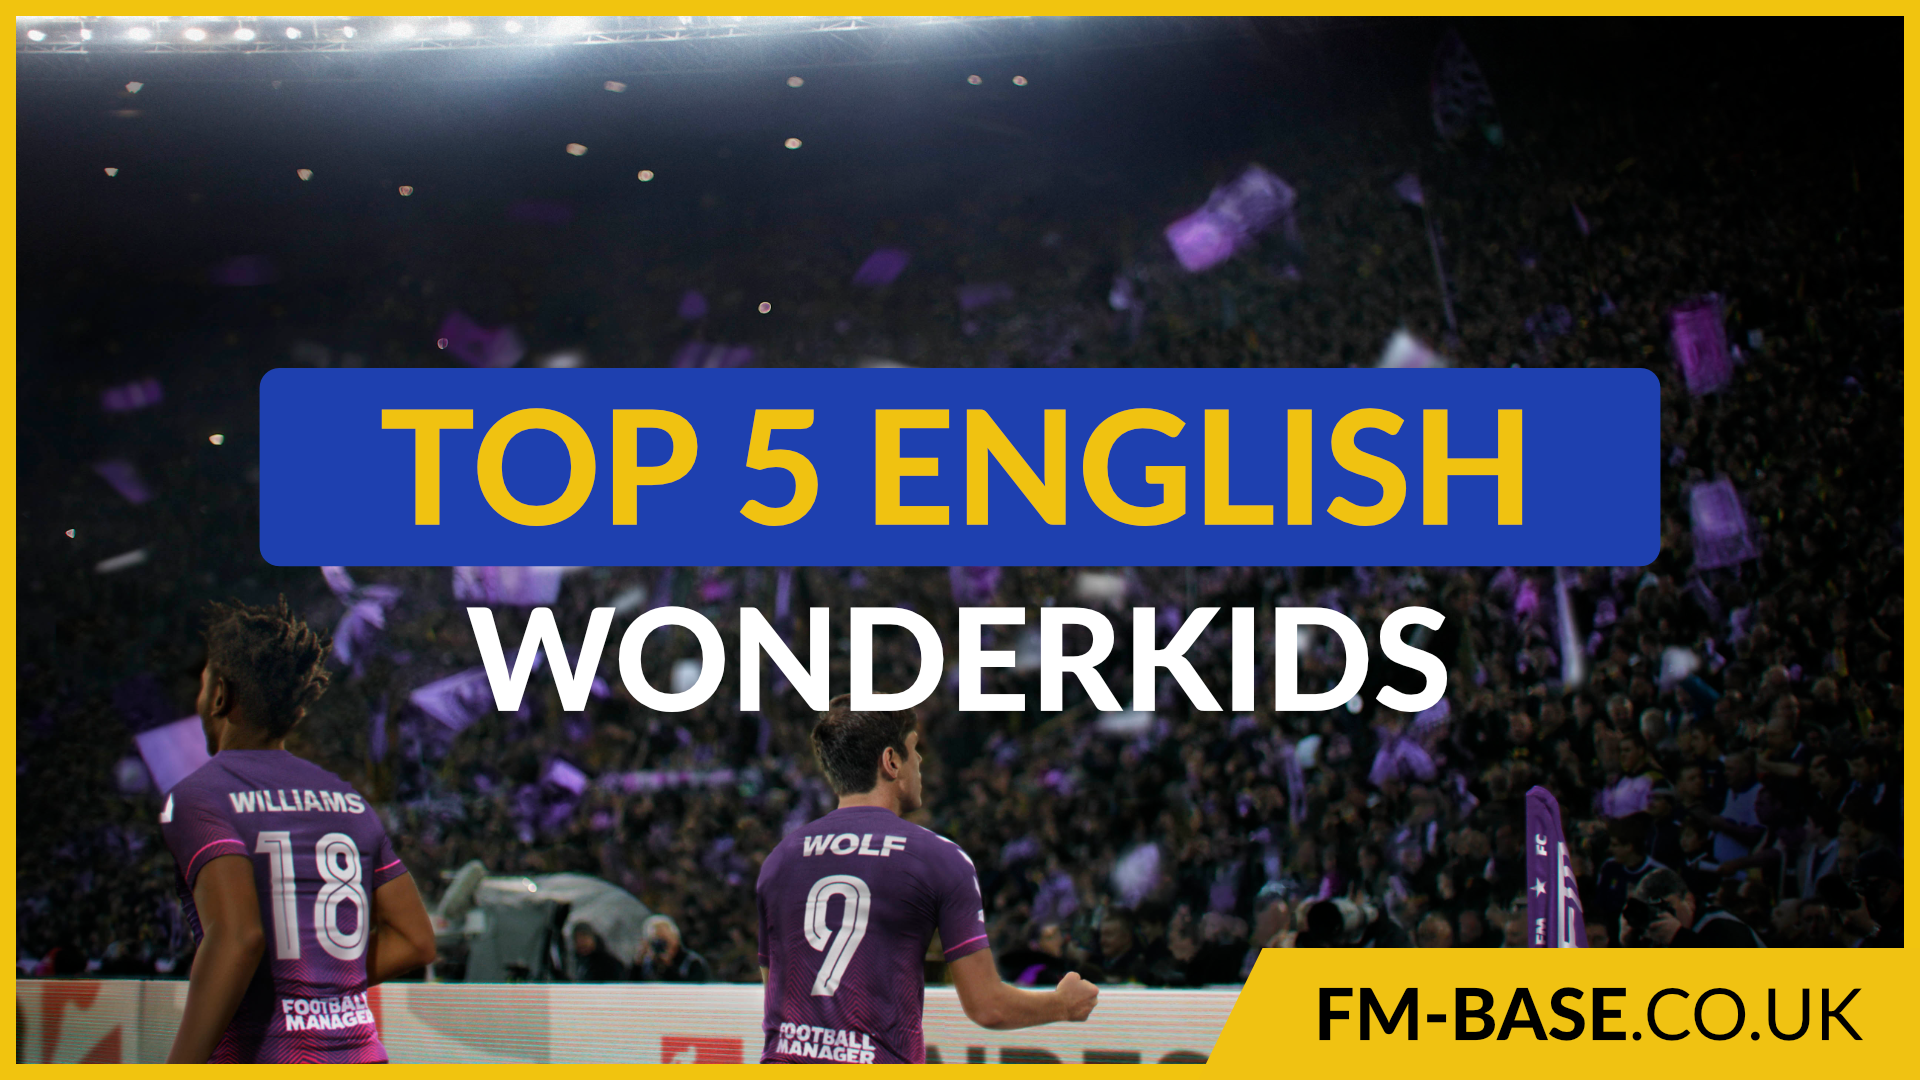 The Top 5 English Wonderkids in Football Manager 2022